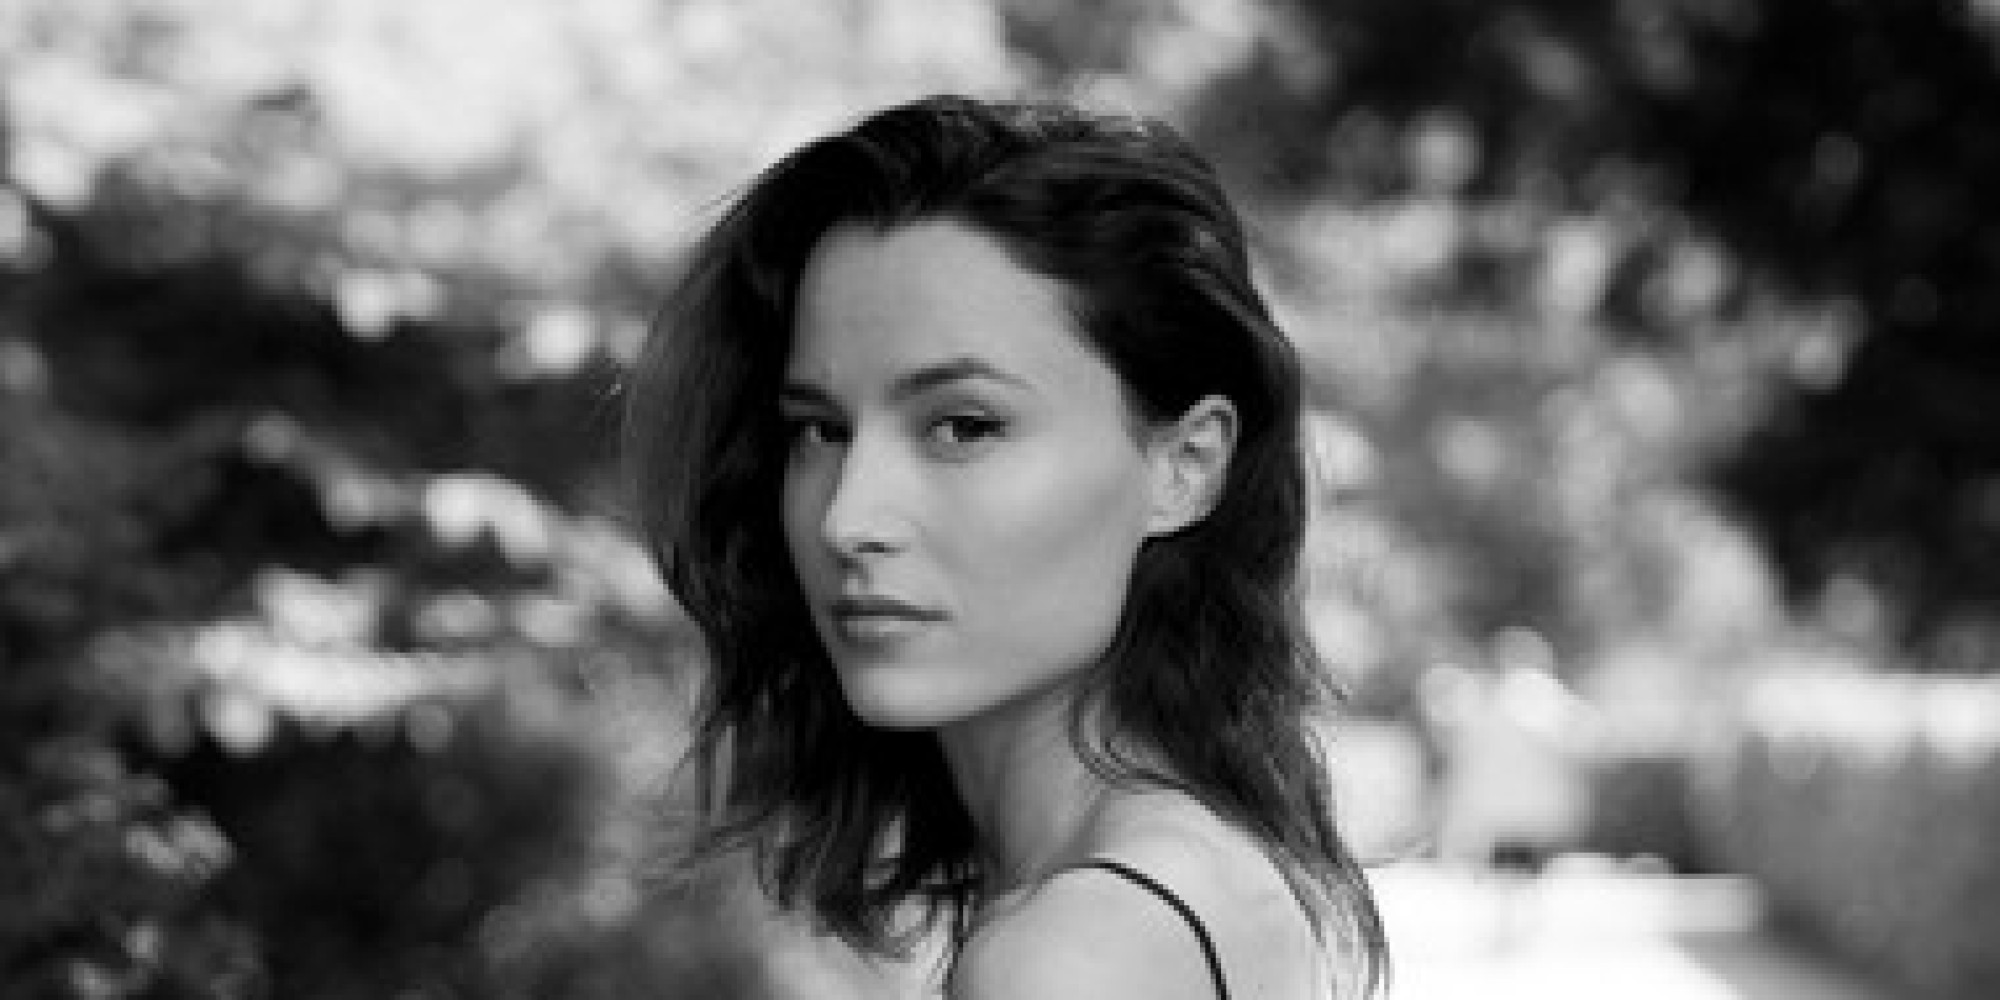 The Transporter Refueled Actress Loan Chabanol Opens Her First Solo